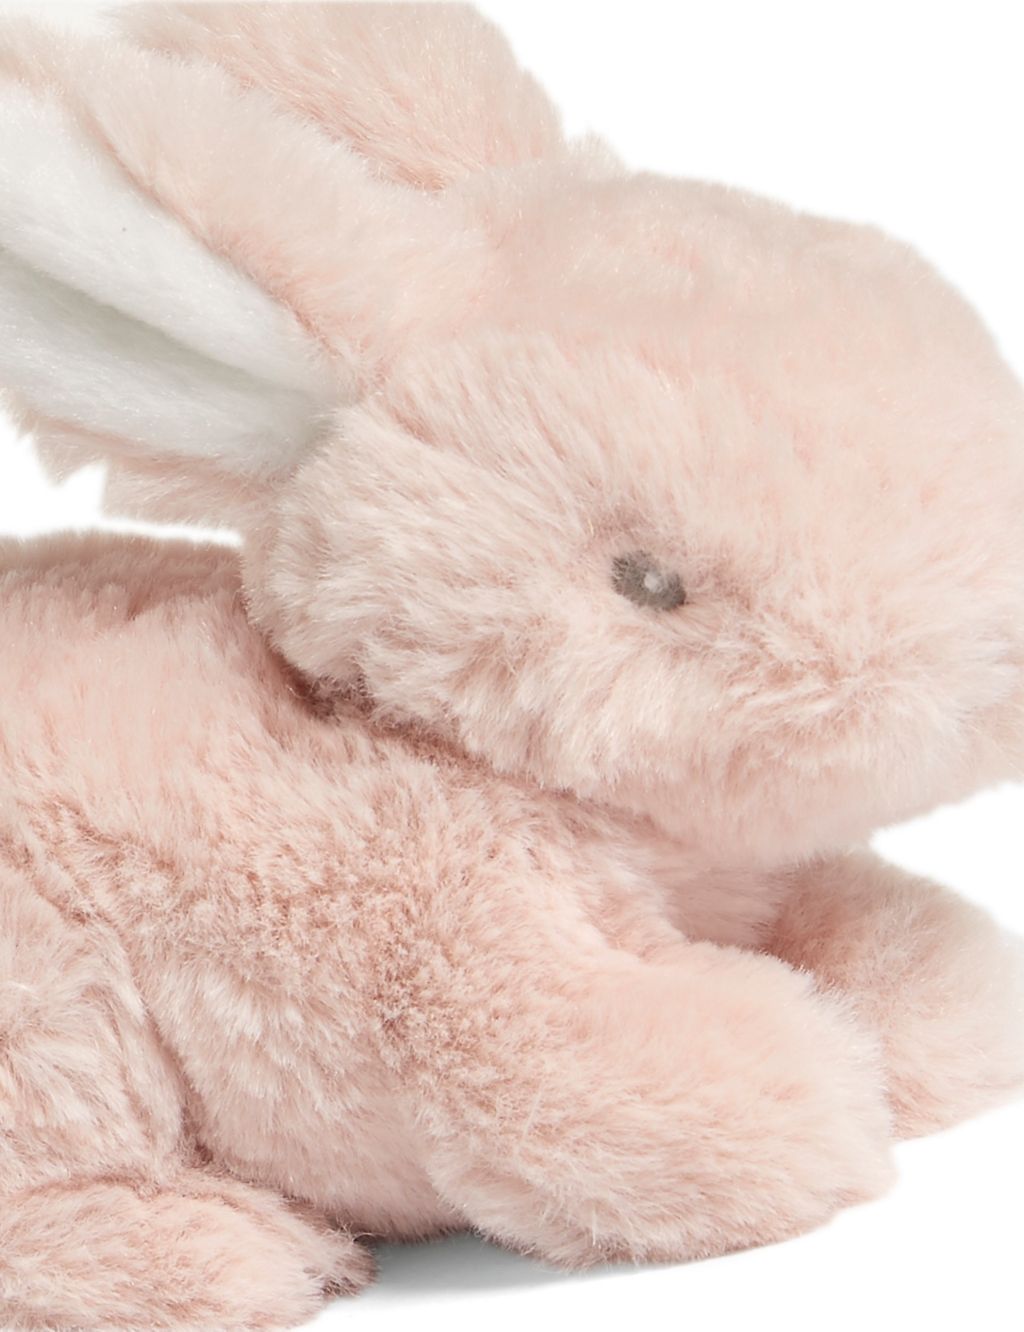 Forever Treasured Pink Bunny Soft Toy 2 of 3